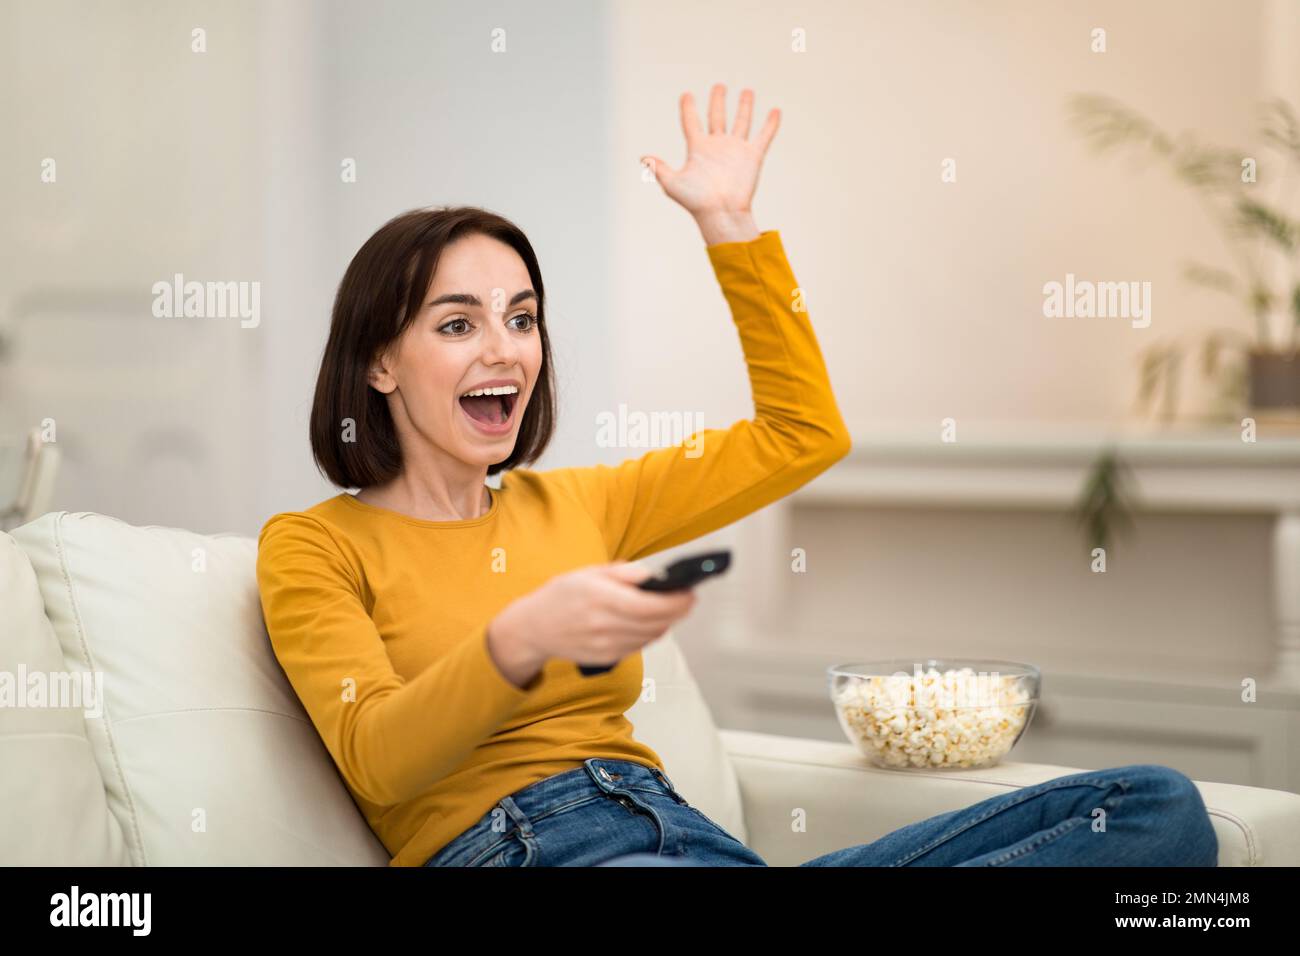 Emotional woman watching TV show with popcorn at home Stock Photo